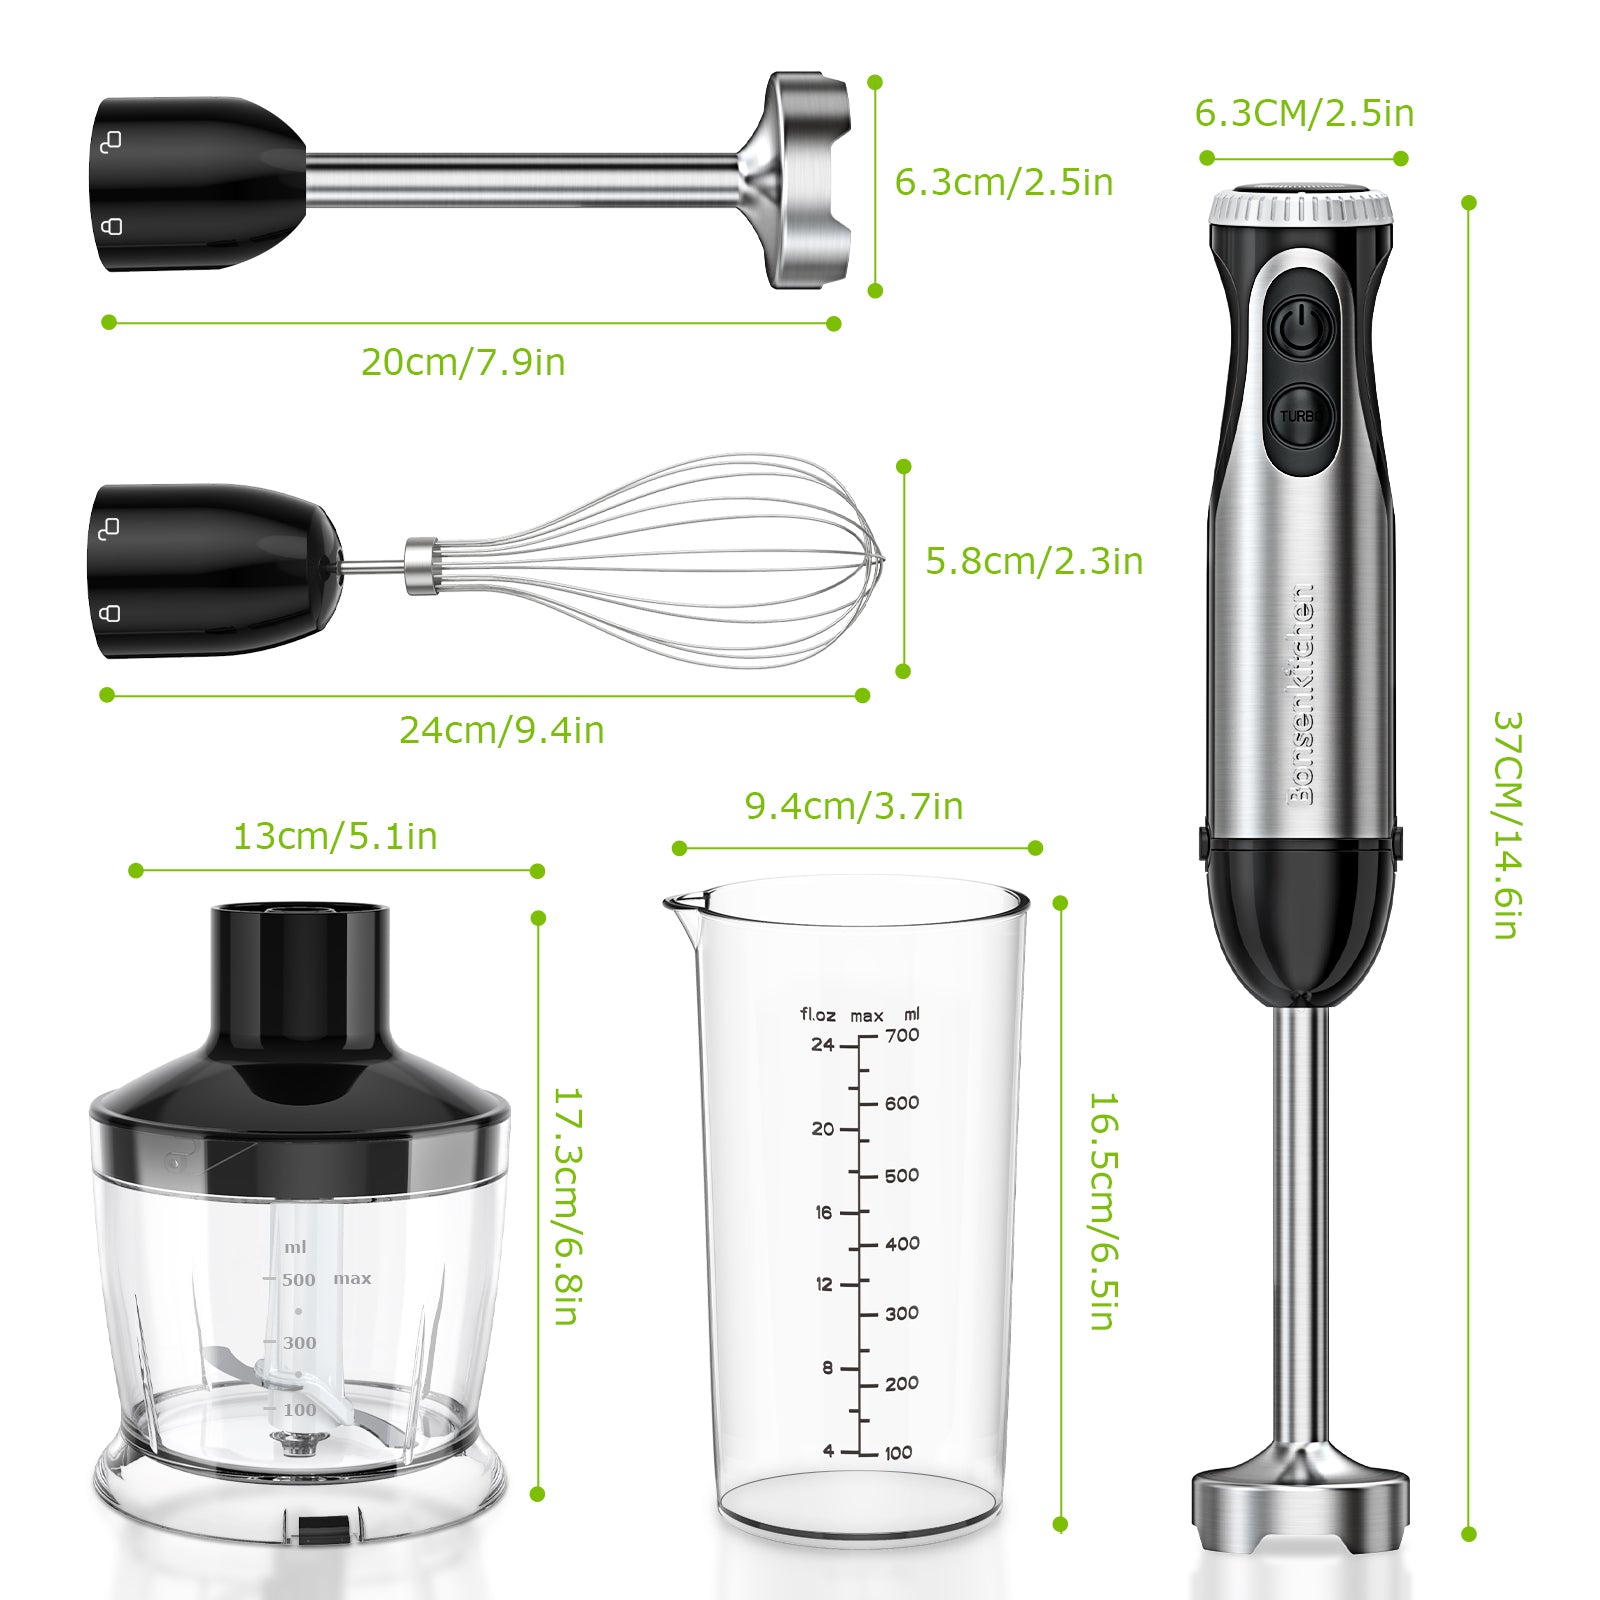 Bonsenkitchen MF8710 Electric Milk Frother with Stand, Black